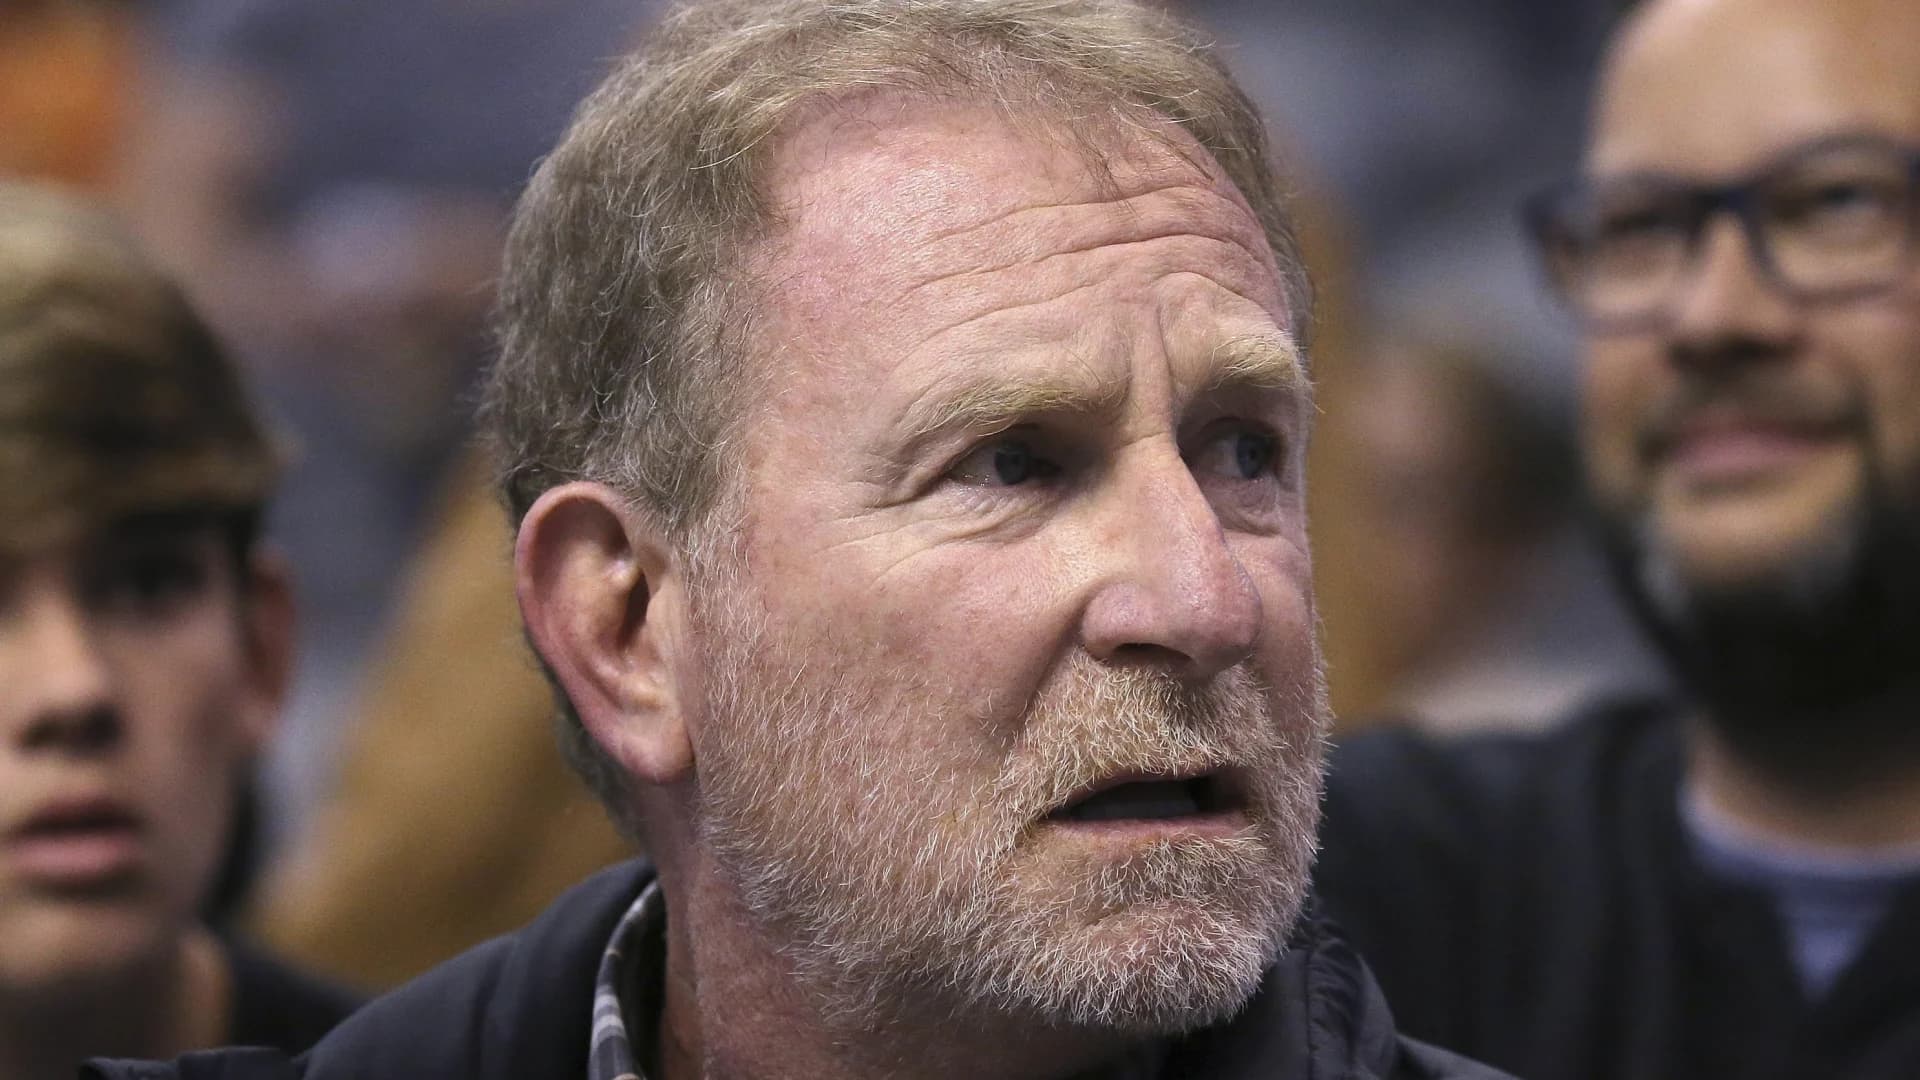 Suns owner Sarver suspended 1 year, fined $10M after probe